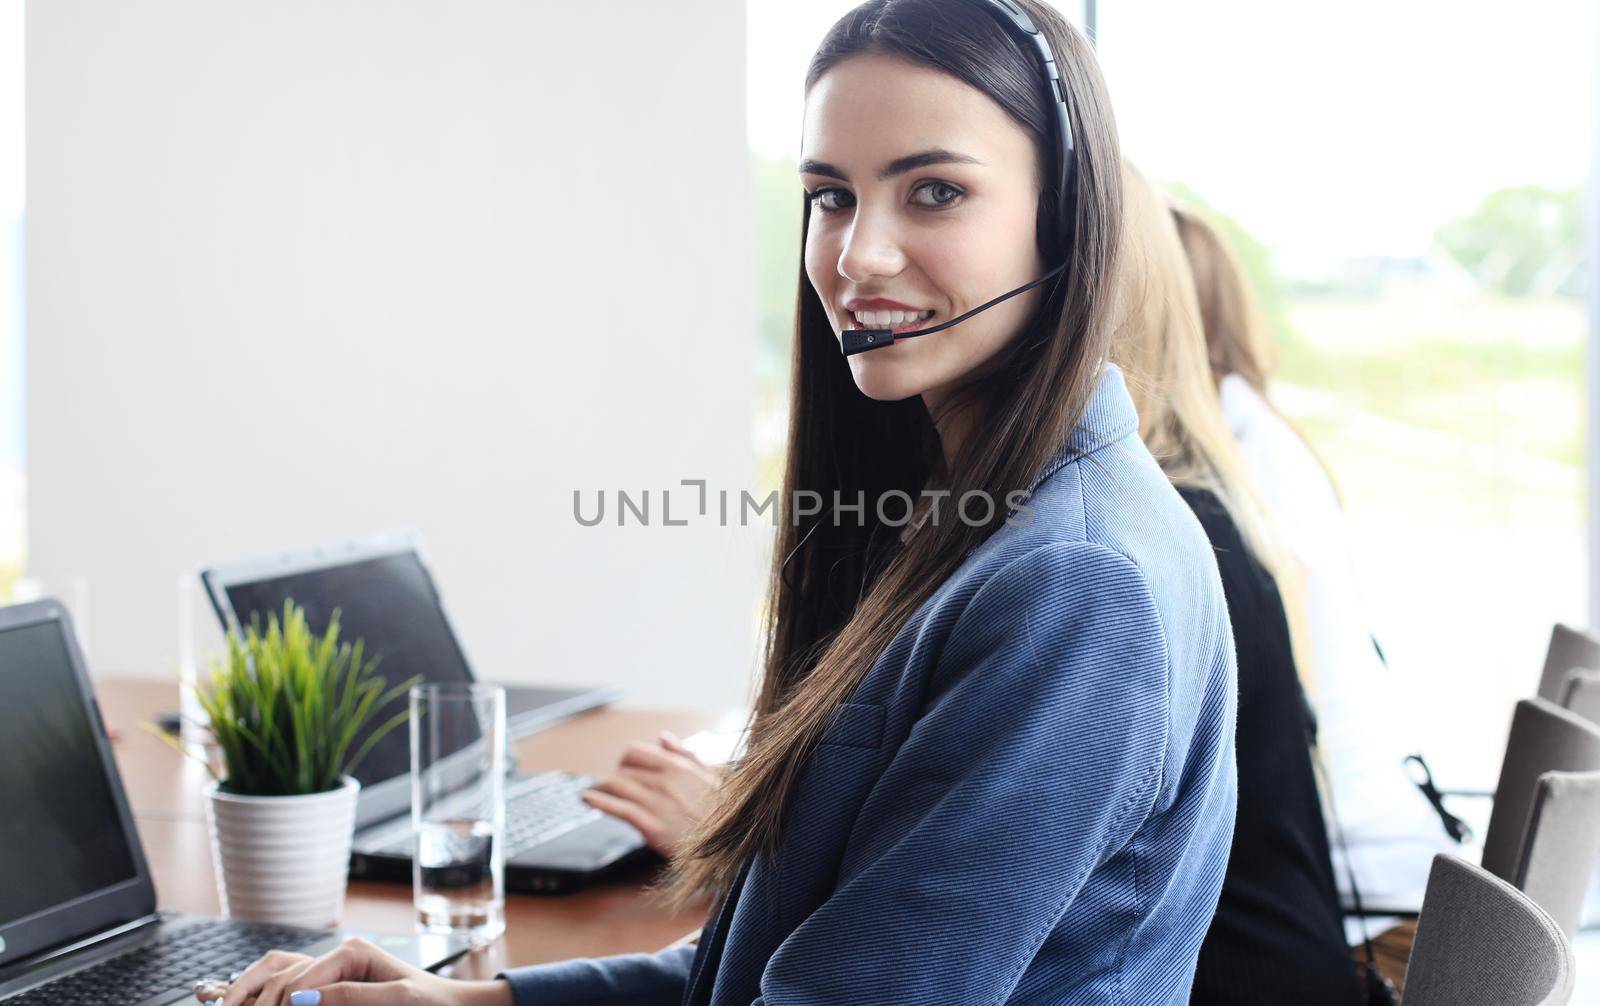 Portrait of call center worker accompanied by her team. Smiling customer support operator at work.